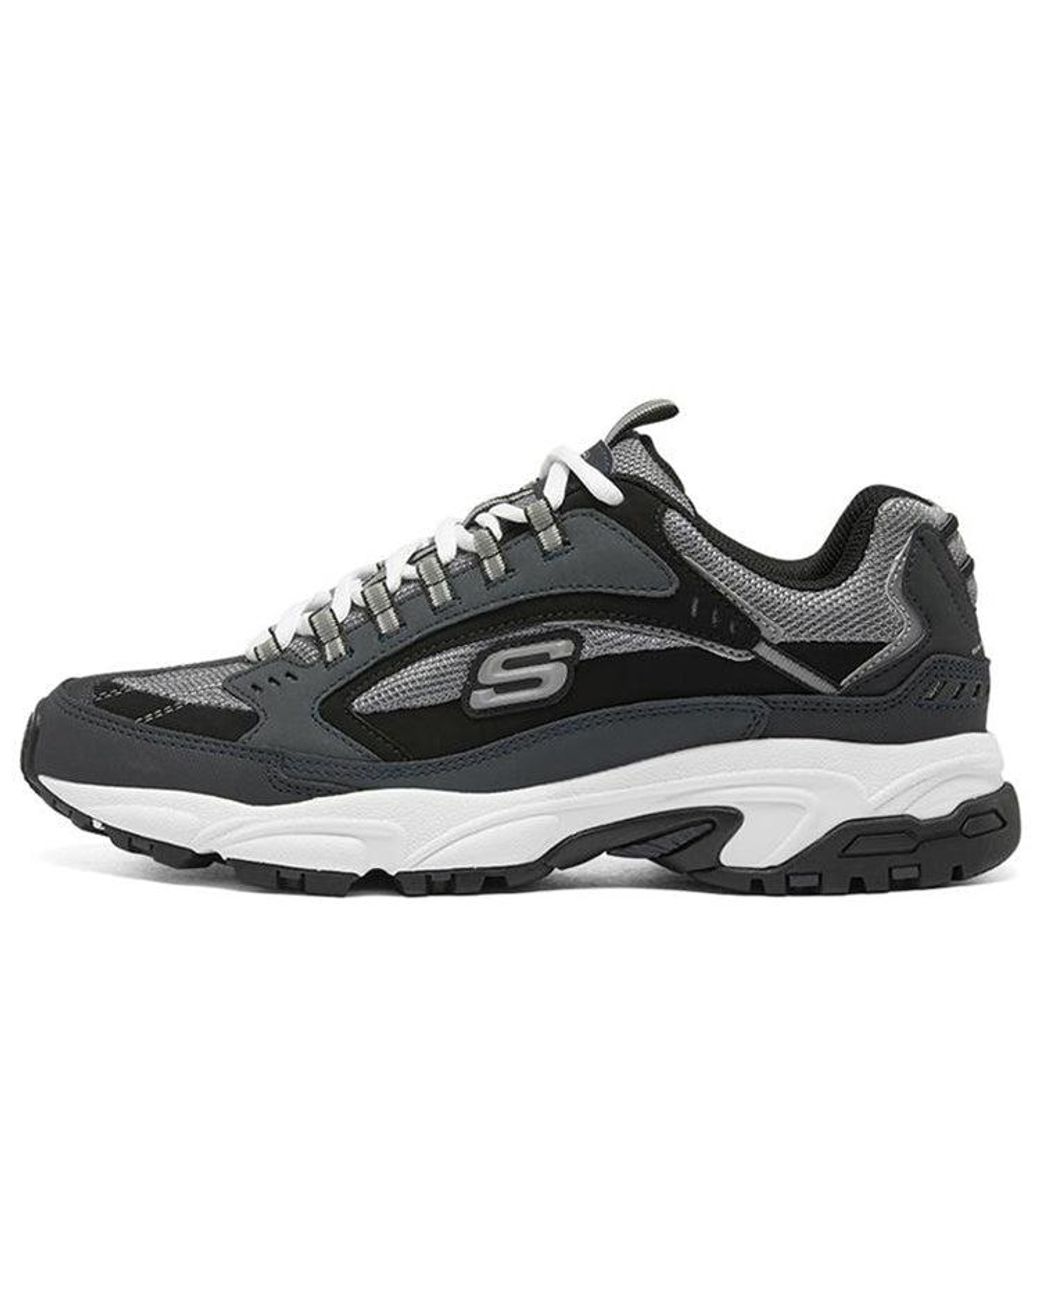 SKECHERS Stamina Airy, Men's Road Running Shoes, Taupe/Multi-color, 43 EU :  Buy Online at Best Price in KSA - Souq is now Amazon.sa: Fashion